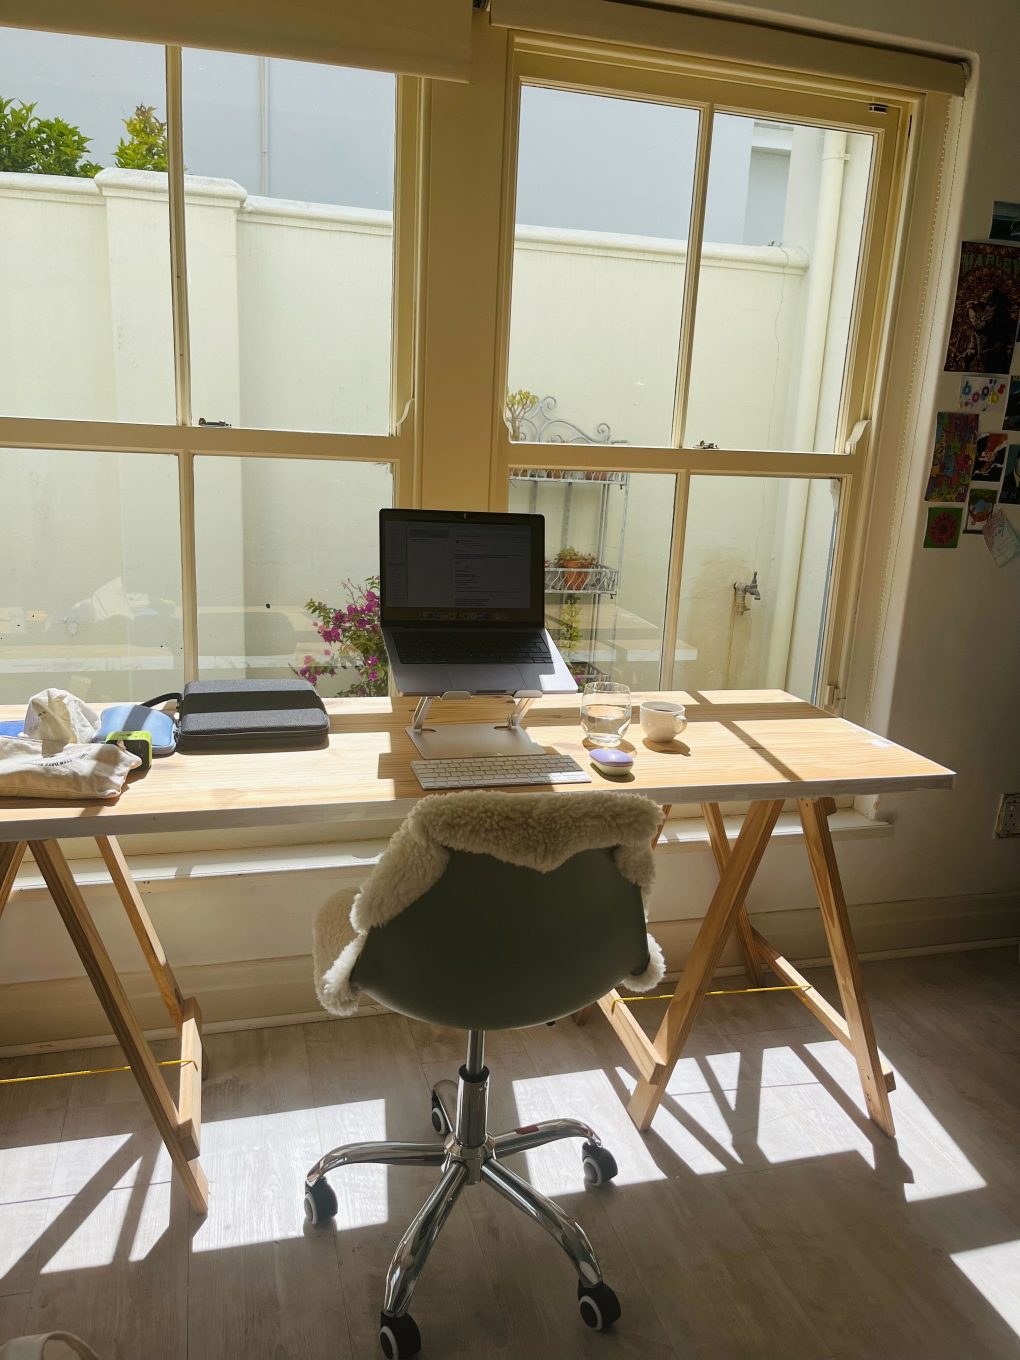 Workplace at the wooden table in front of the window 